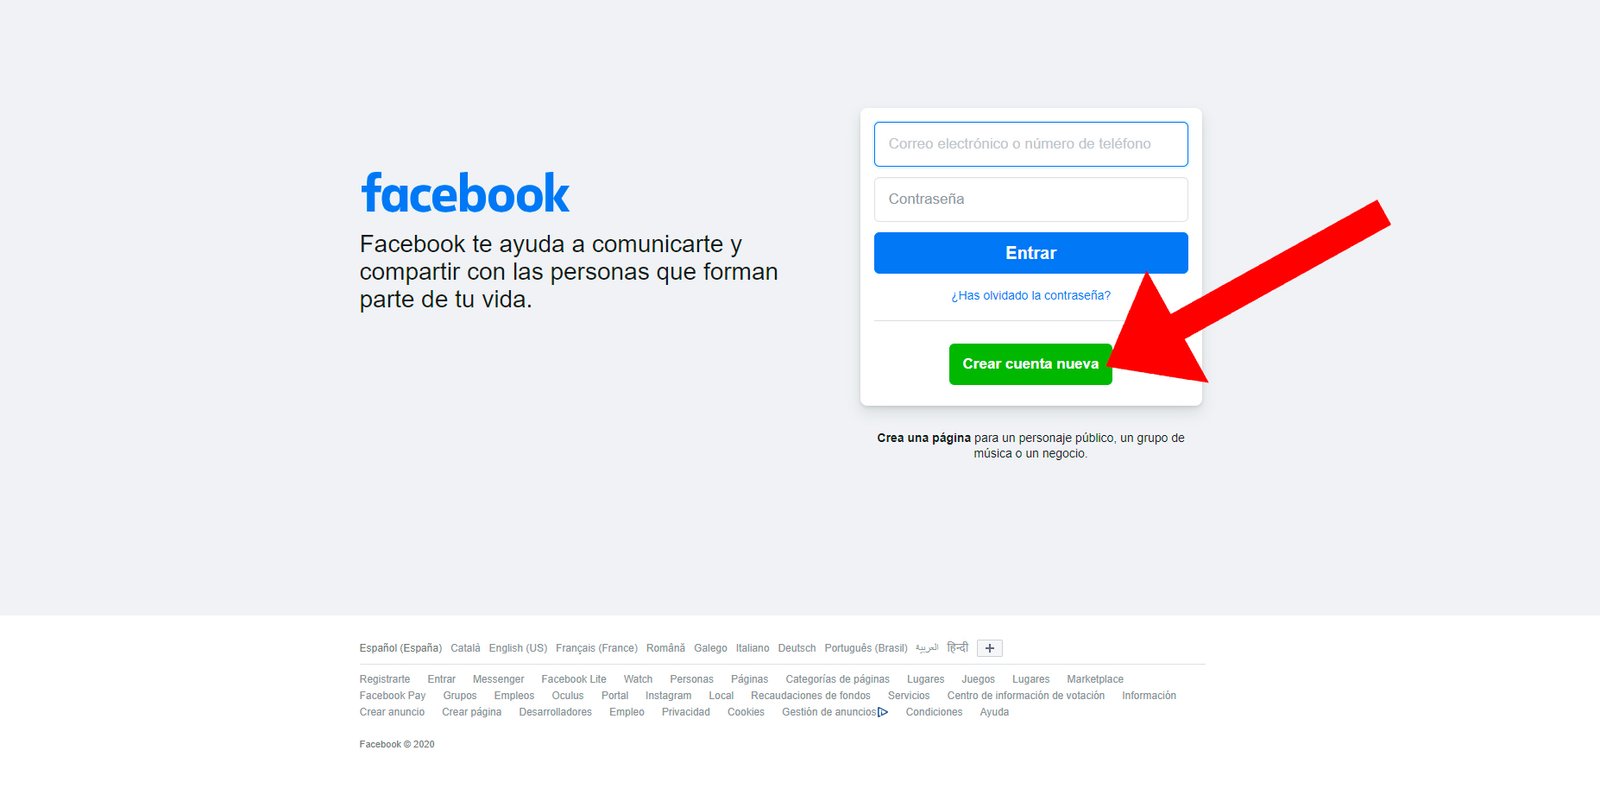 How to register on Facebook: create your account step by step